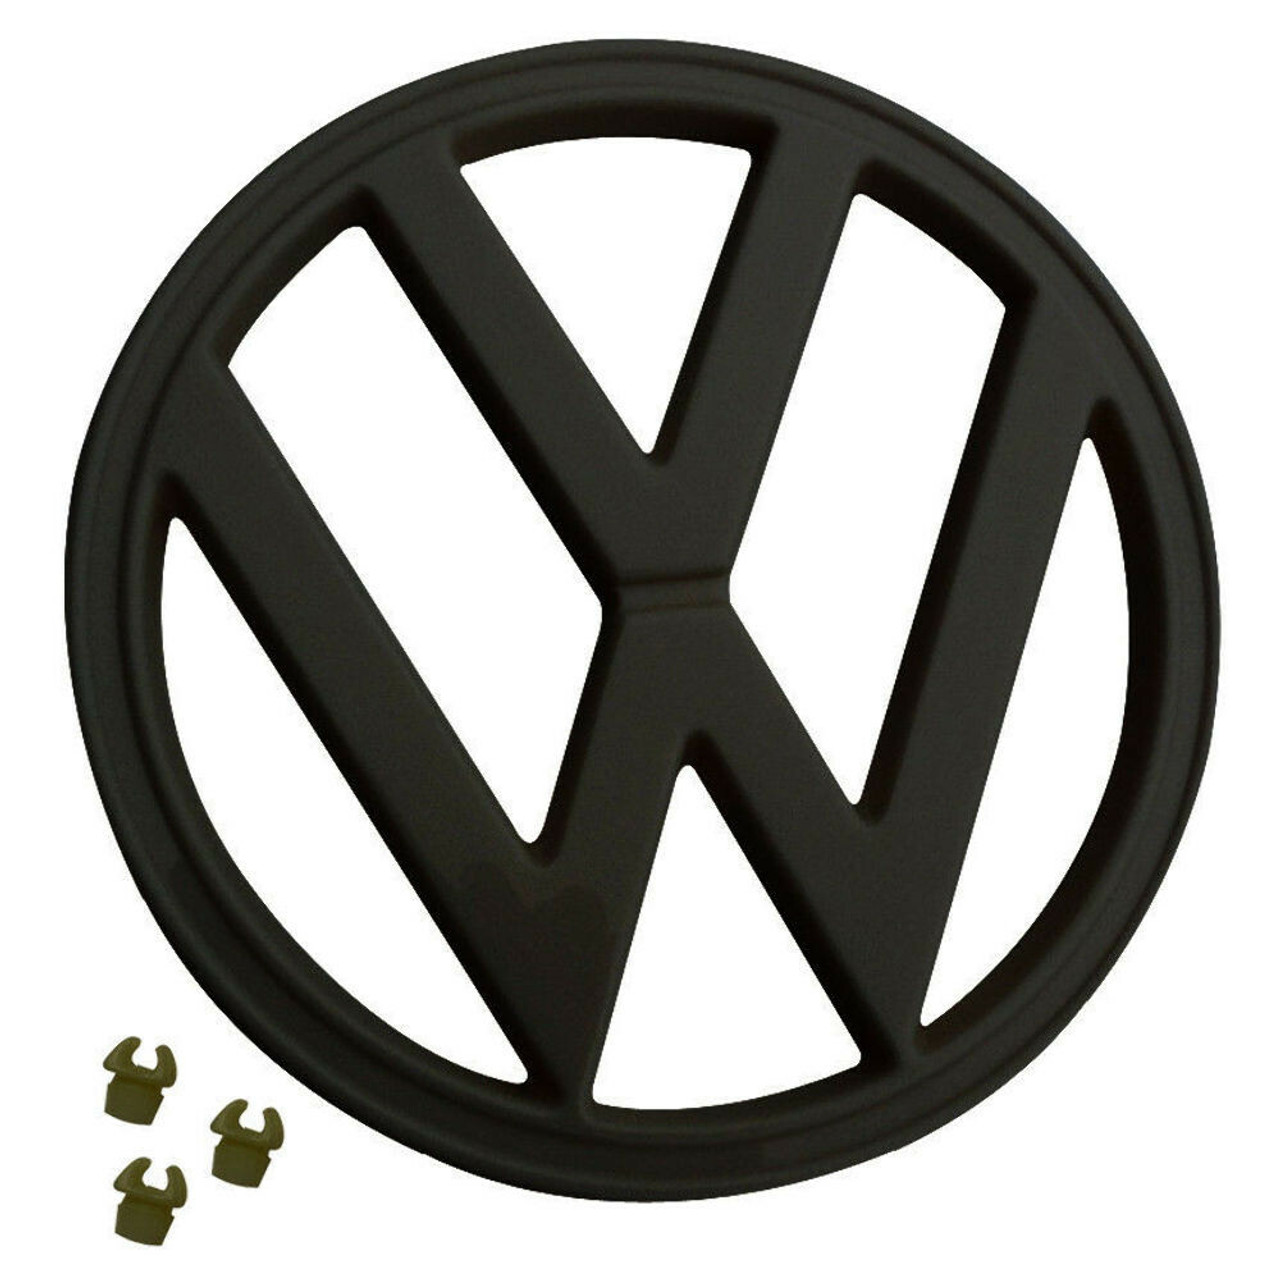 FRONT EMBLEM, BLACK, WITH CLIPS, 72-79 VW TYPE 2 BUS, 7" (182MM) 211-853-601EB